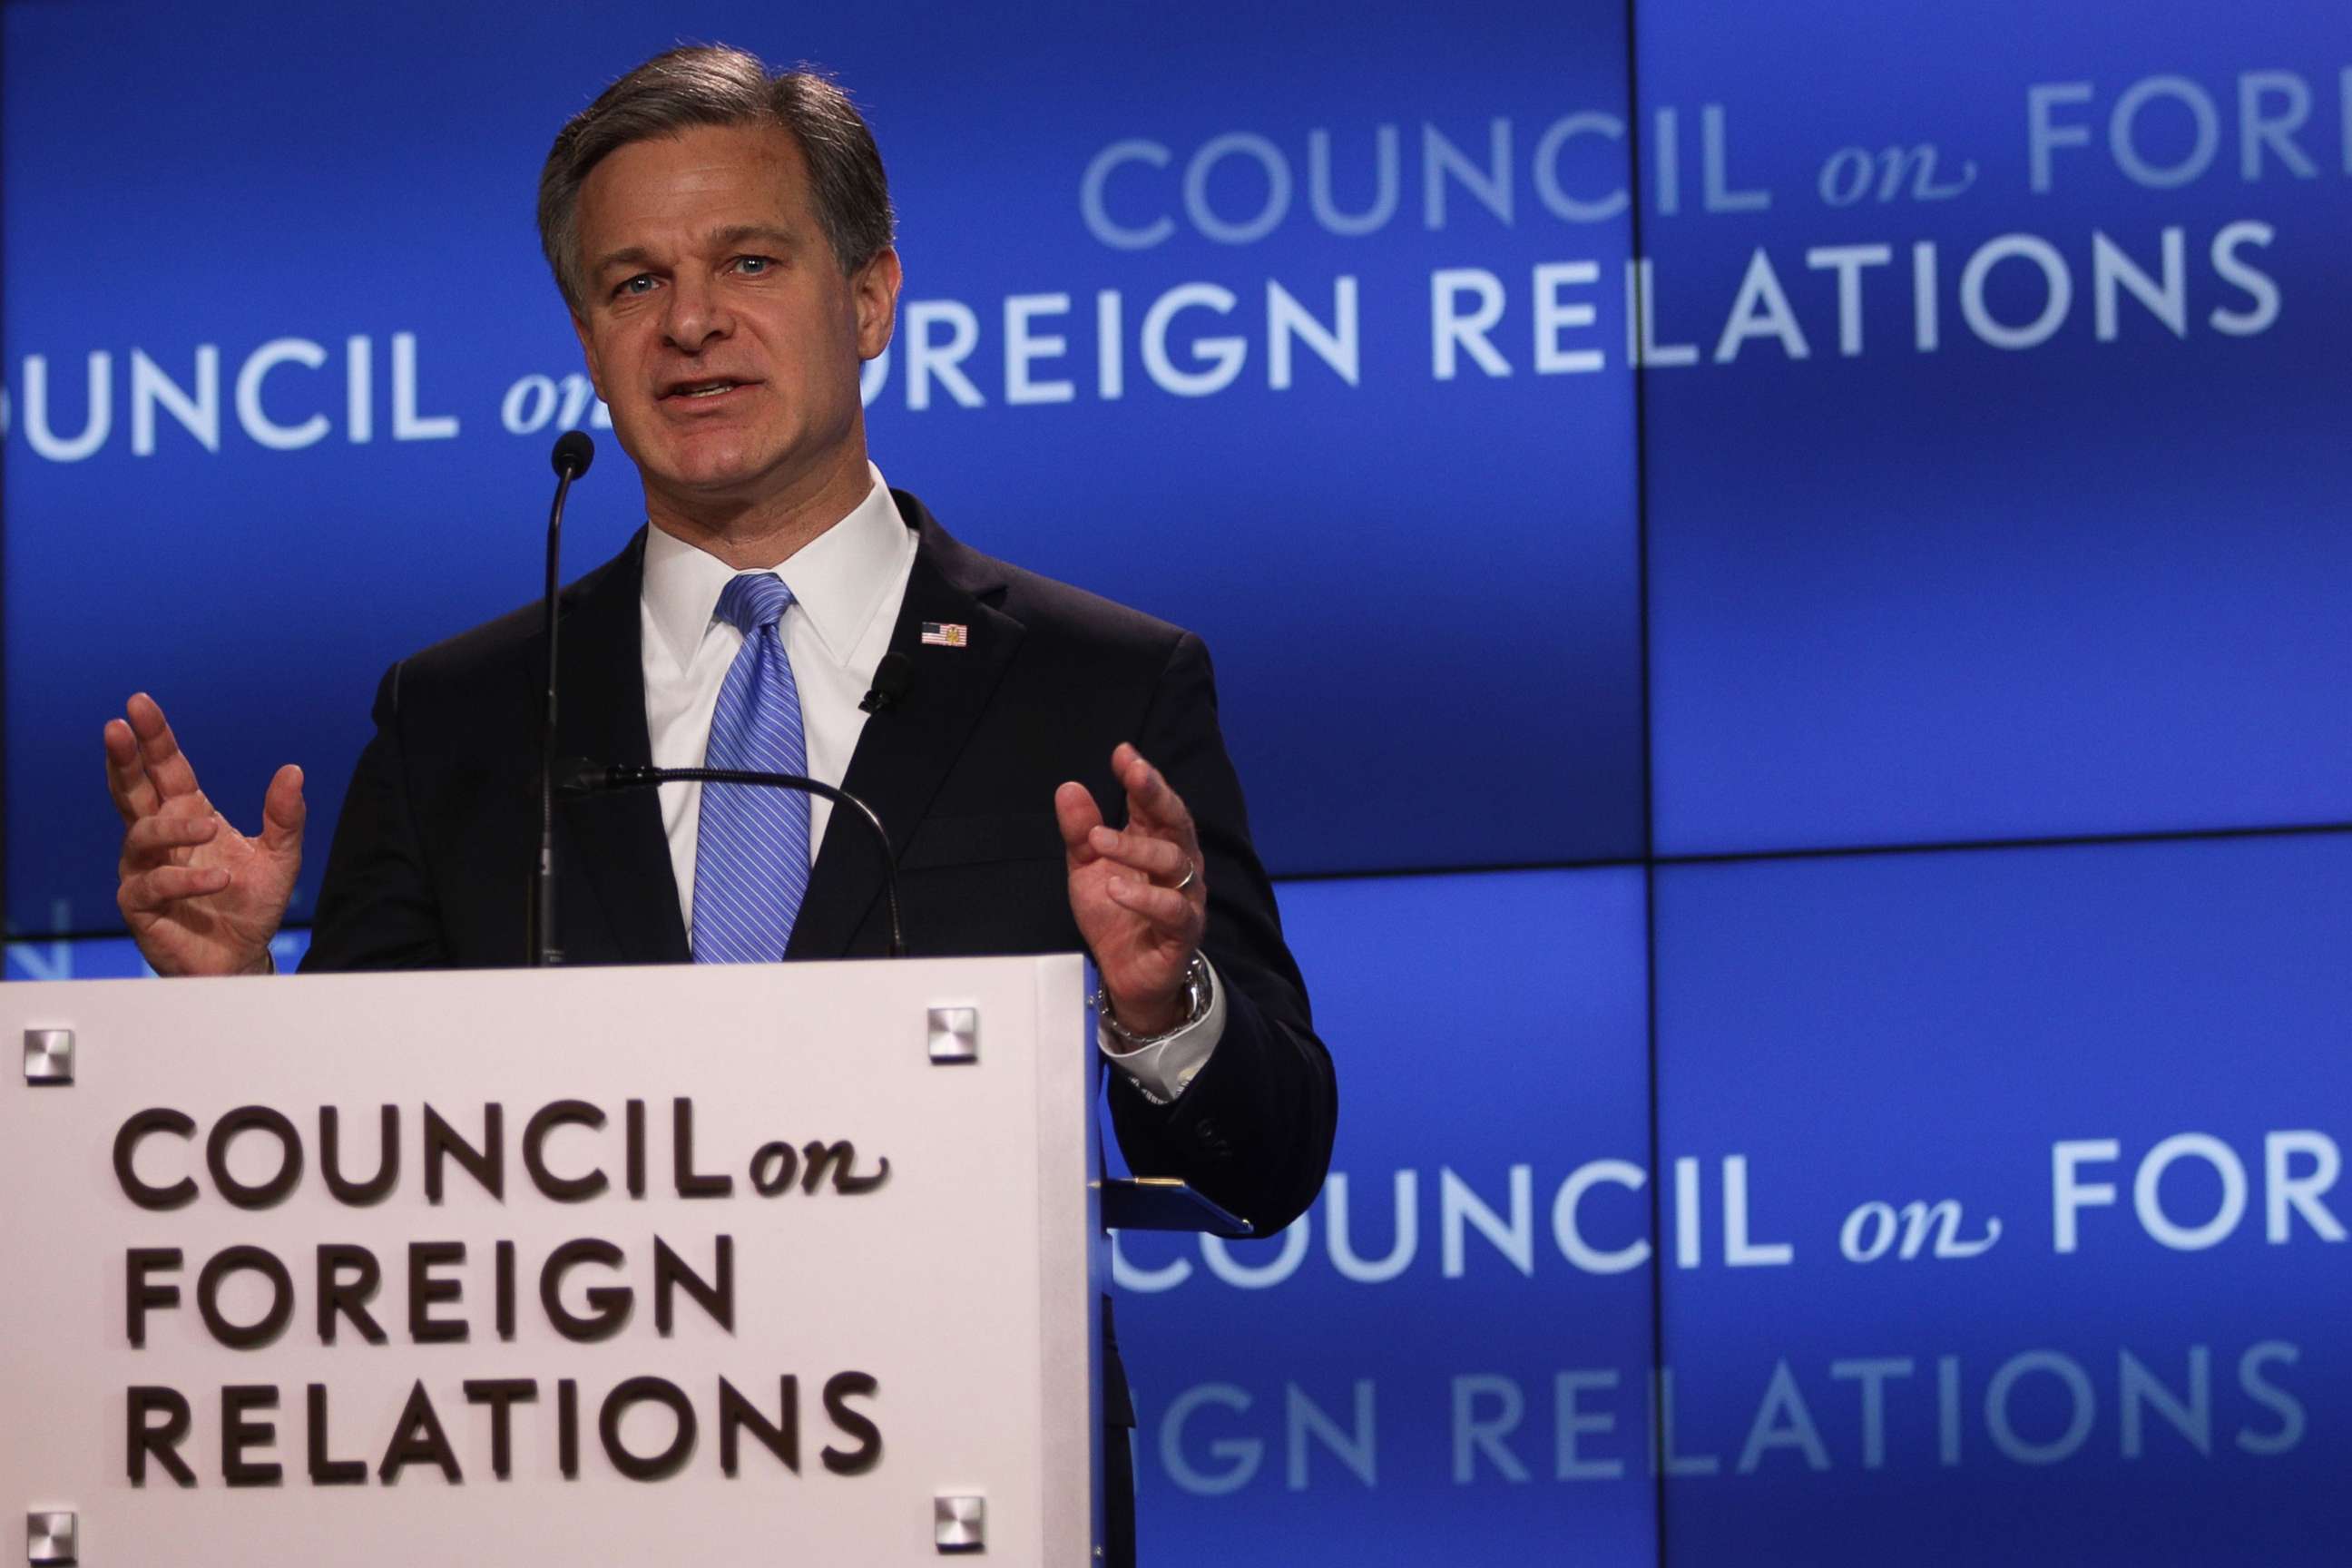 PHOTO: FBI Director Christopher Wray addresses the Council on Foreign Relations (CFR) April 26, 2019 in Washington, D.C. Wray spoke on "the FBI's role in protecting the United States from today's global threats."